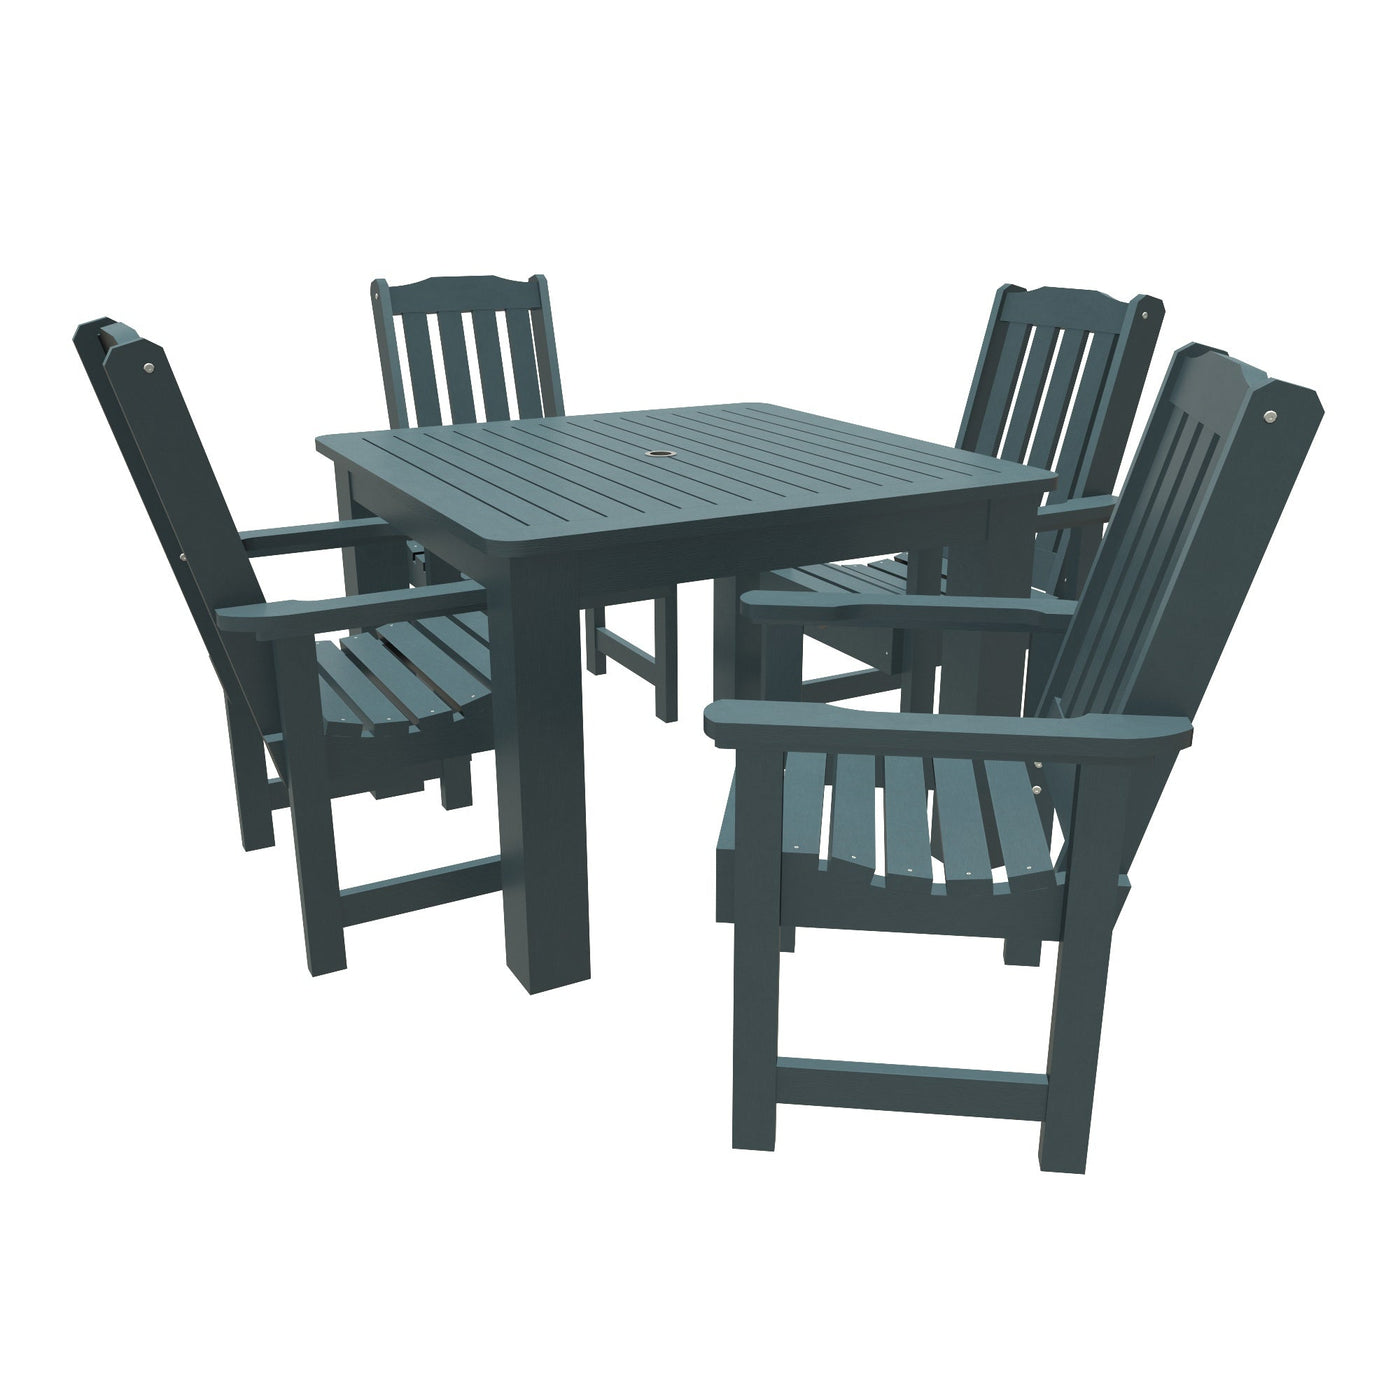 Lehigh 5pc Square Dining Set 42in x 42in - Dining Height Dining Highwood USA Nantucket Blue 